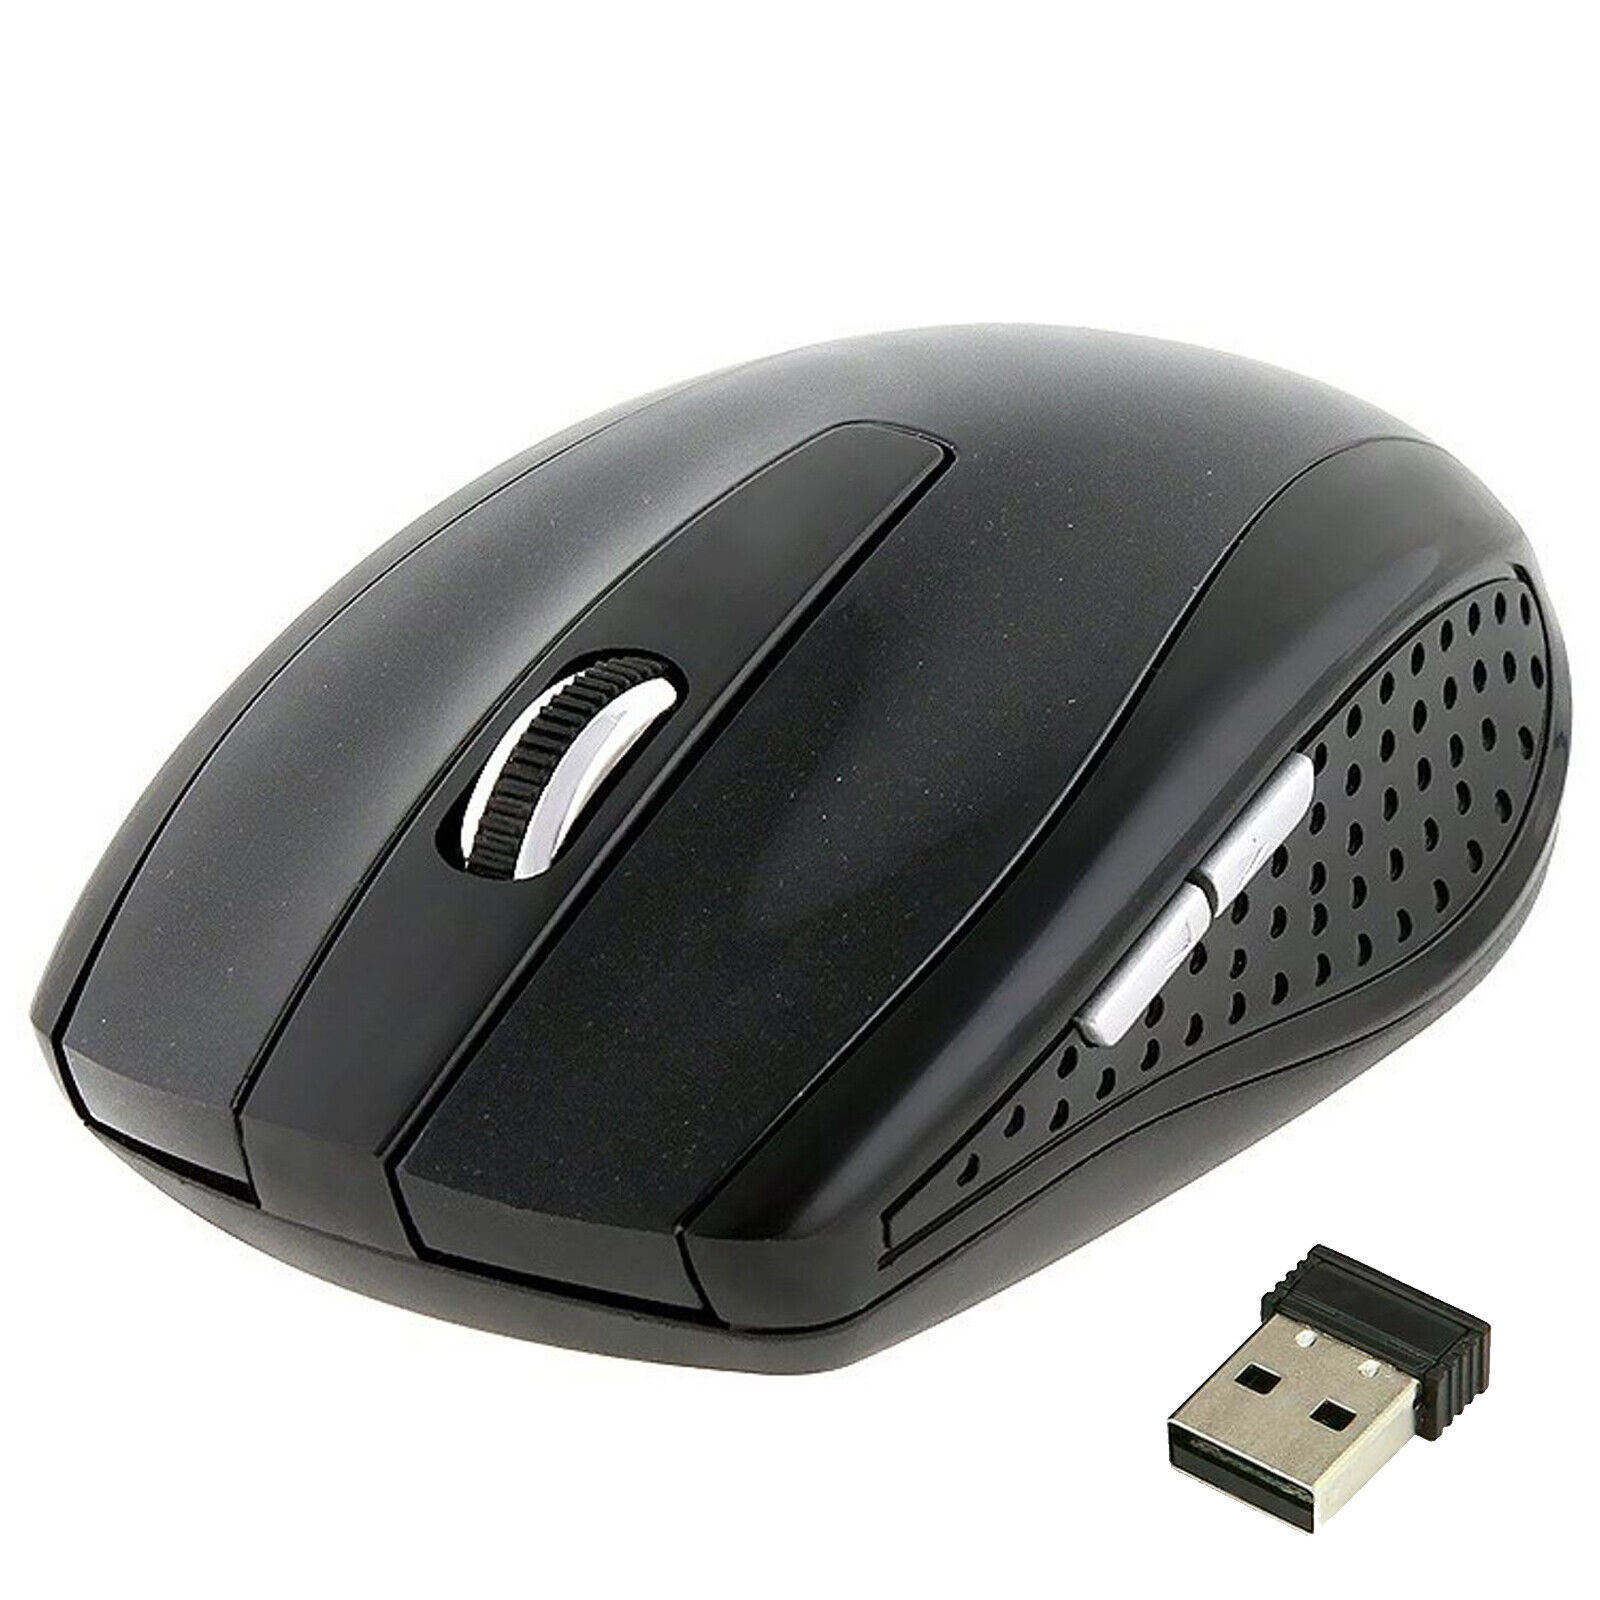 2.4GHz High Quality Wireless Optical Mouse/Mice + USB 2.0 Receiver for PC Laptop